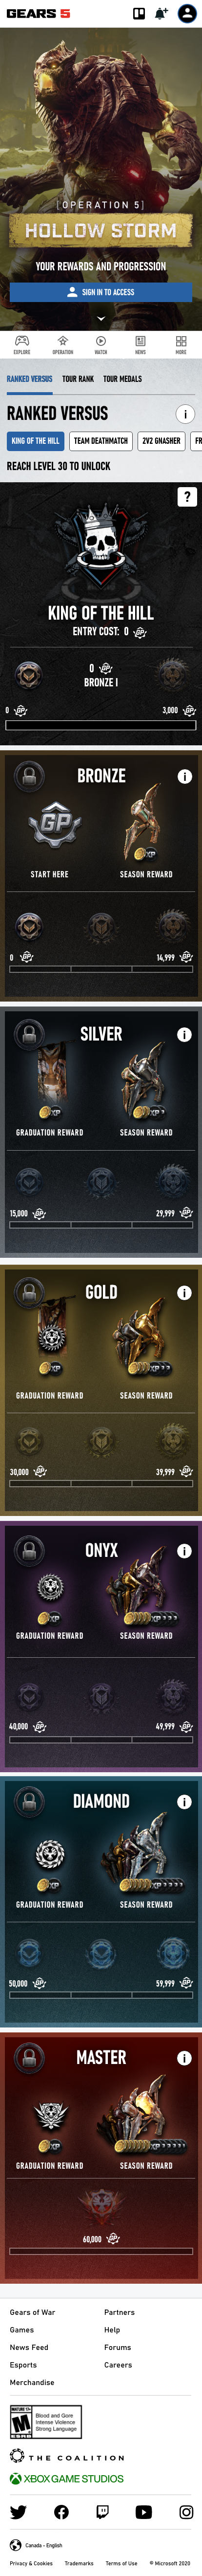 Operation 5 Ranked Versus on mobile